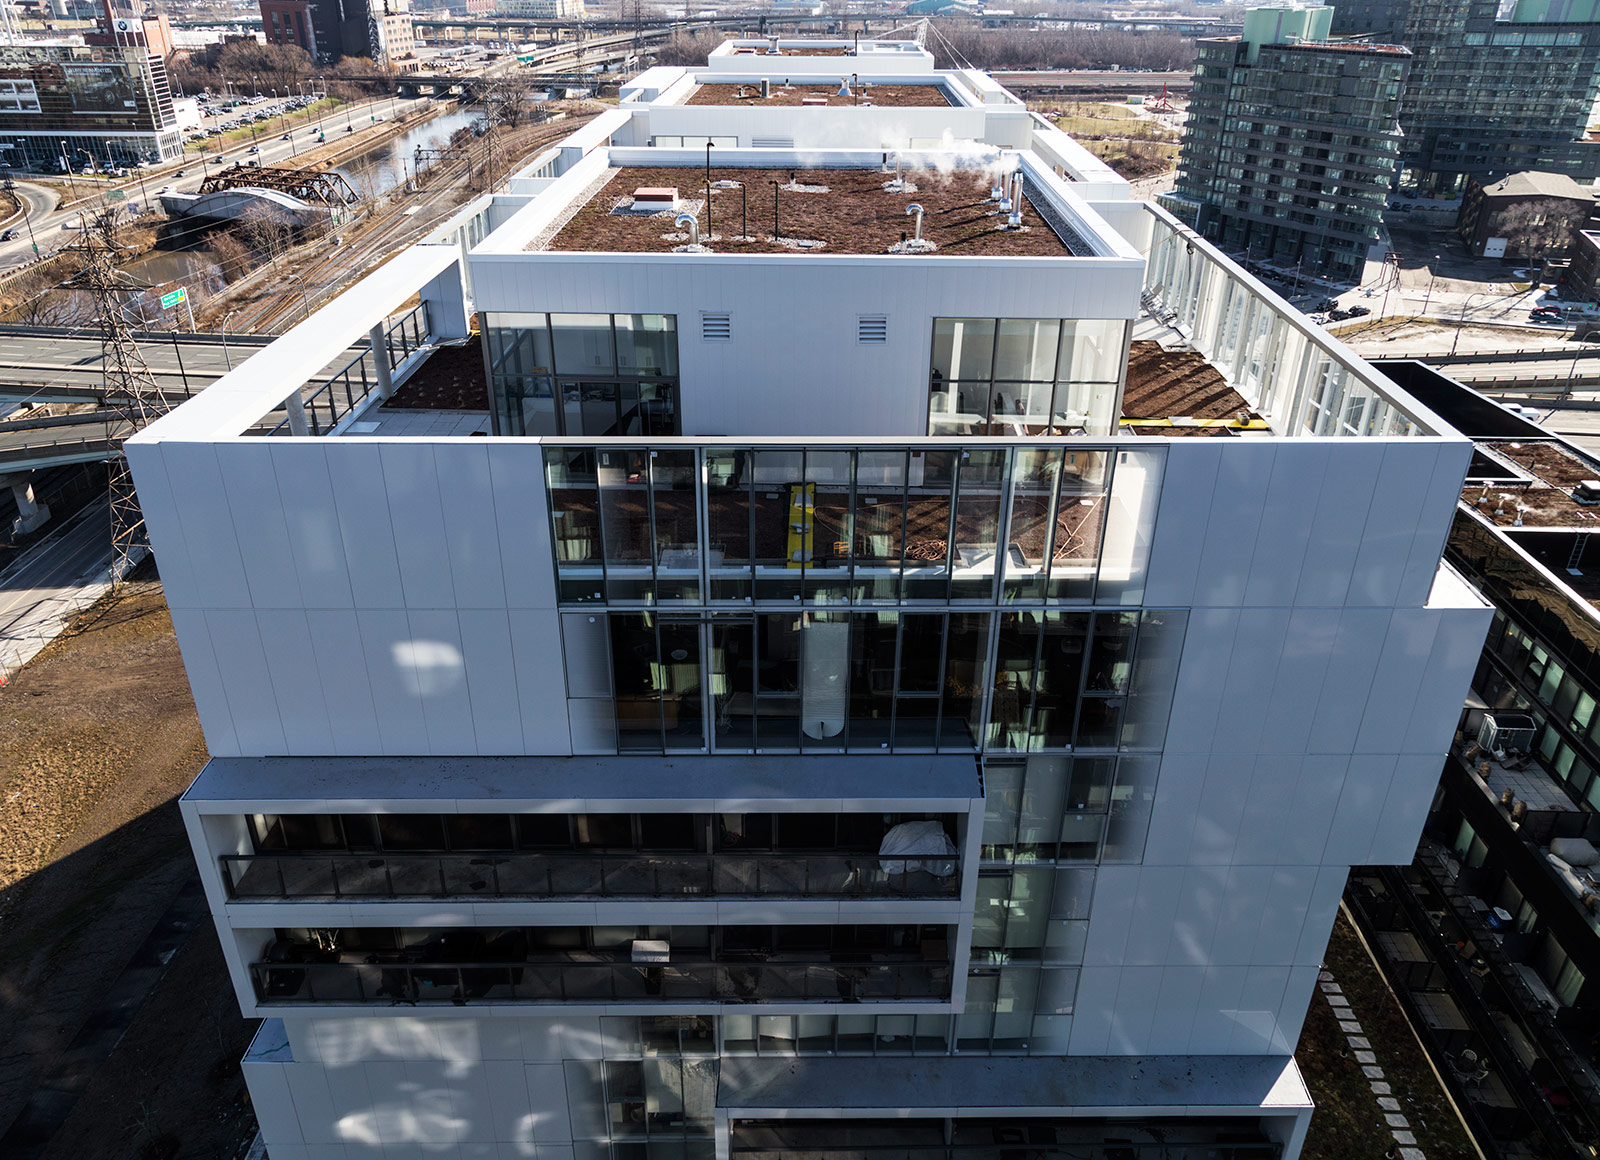 20160513. A rooftop view of Toronto's River City Phase 2